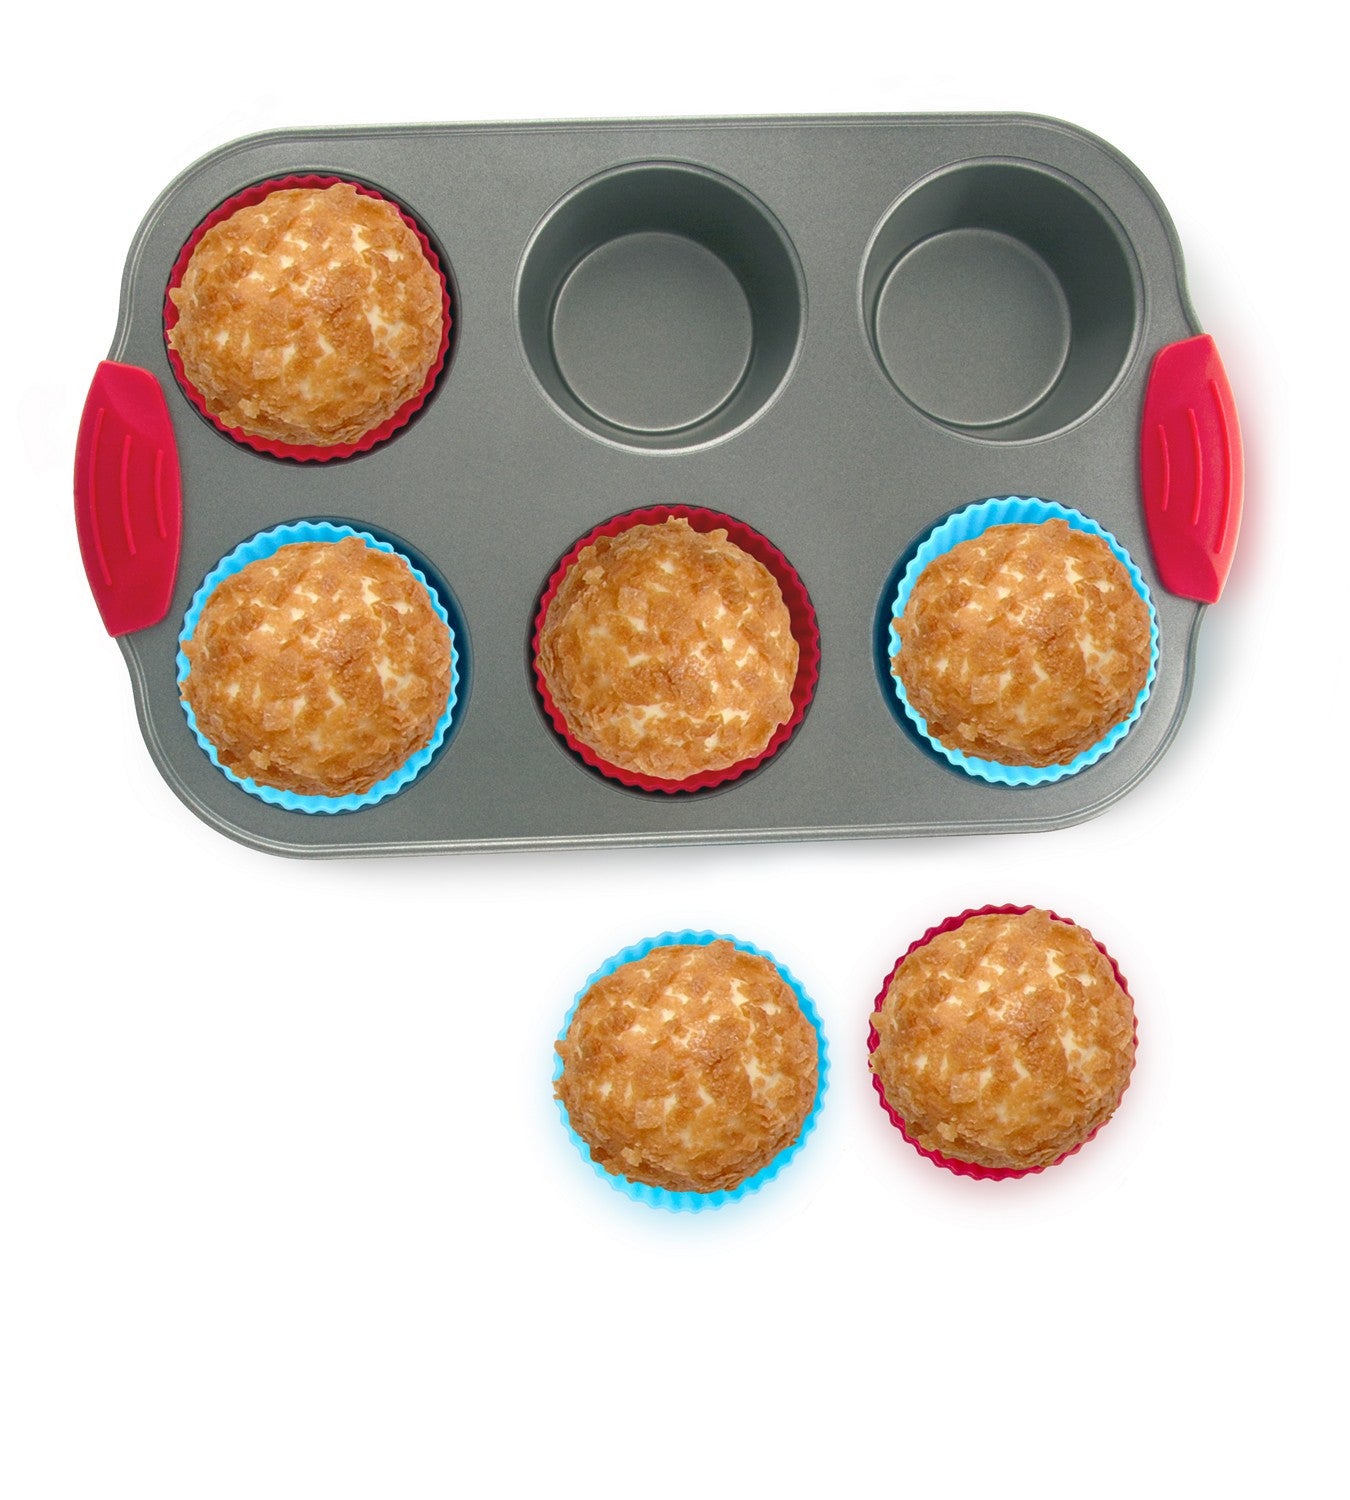 Silicone Texas Muffin Pan Set- 6 Cup Jumbo Silicone Cupcake Pan, Non-Stick  Silicone, Just PoP Out! Perfect for Egg Muffin, Big Cupcake - BPA Free and  Dishwasher Safe, Set of 2 